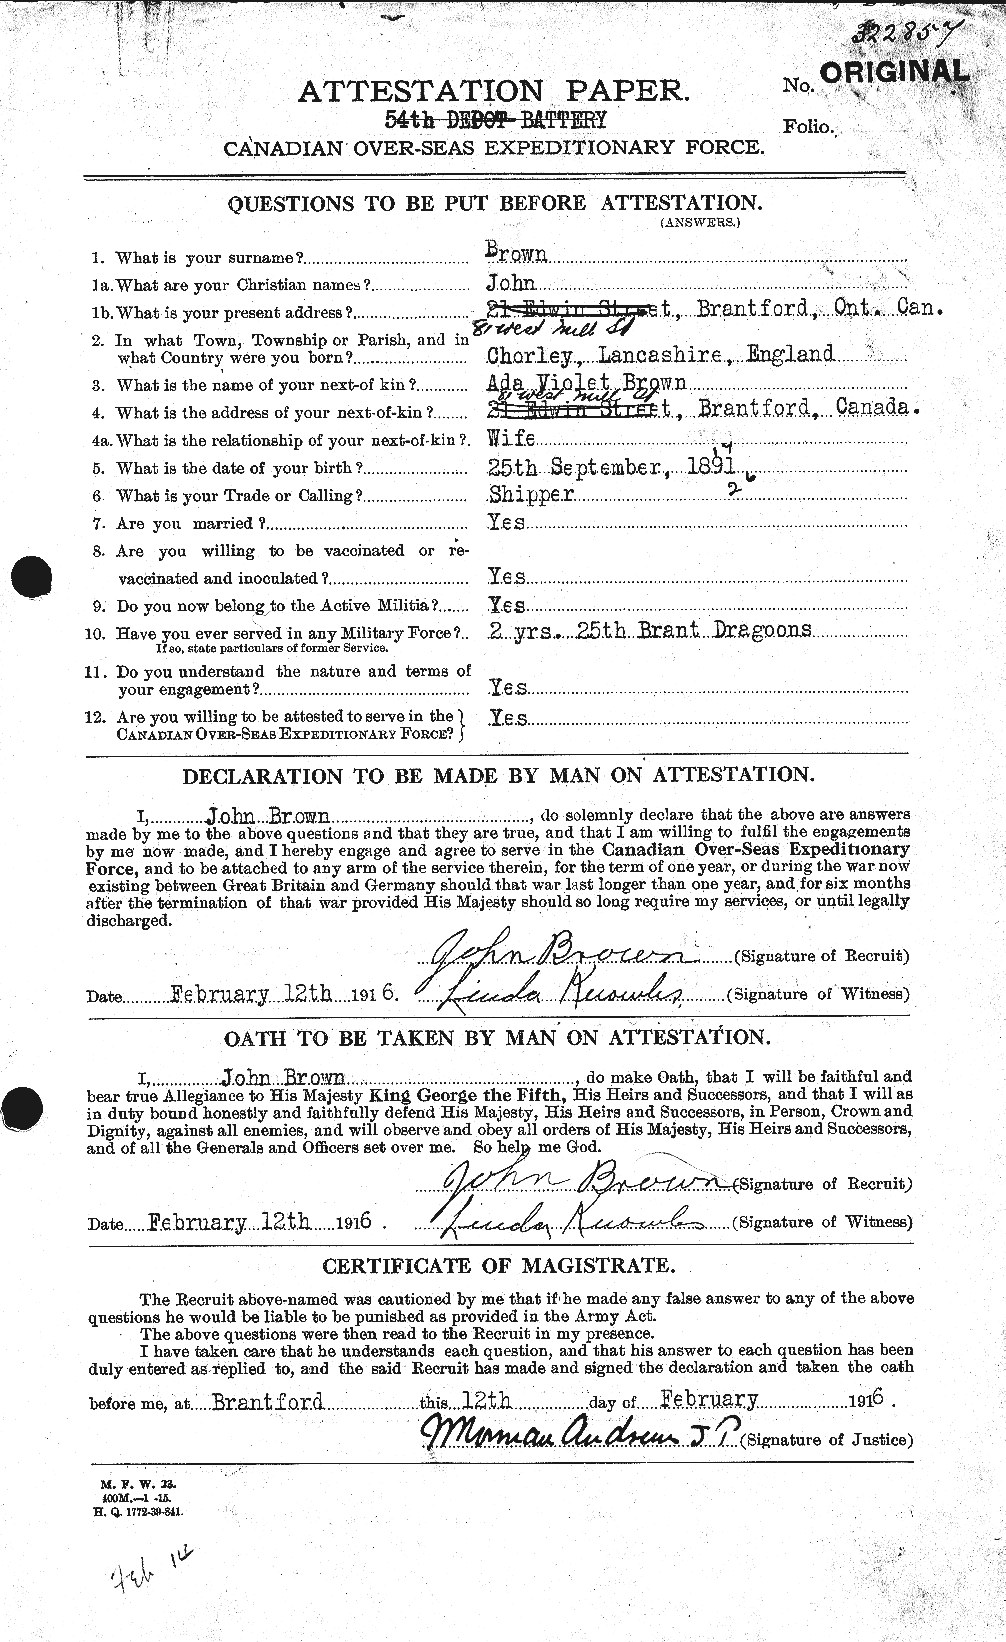 Personnel Records of the First World War - CEF 263904a